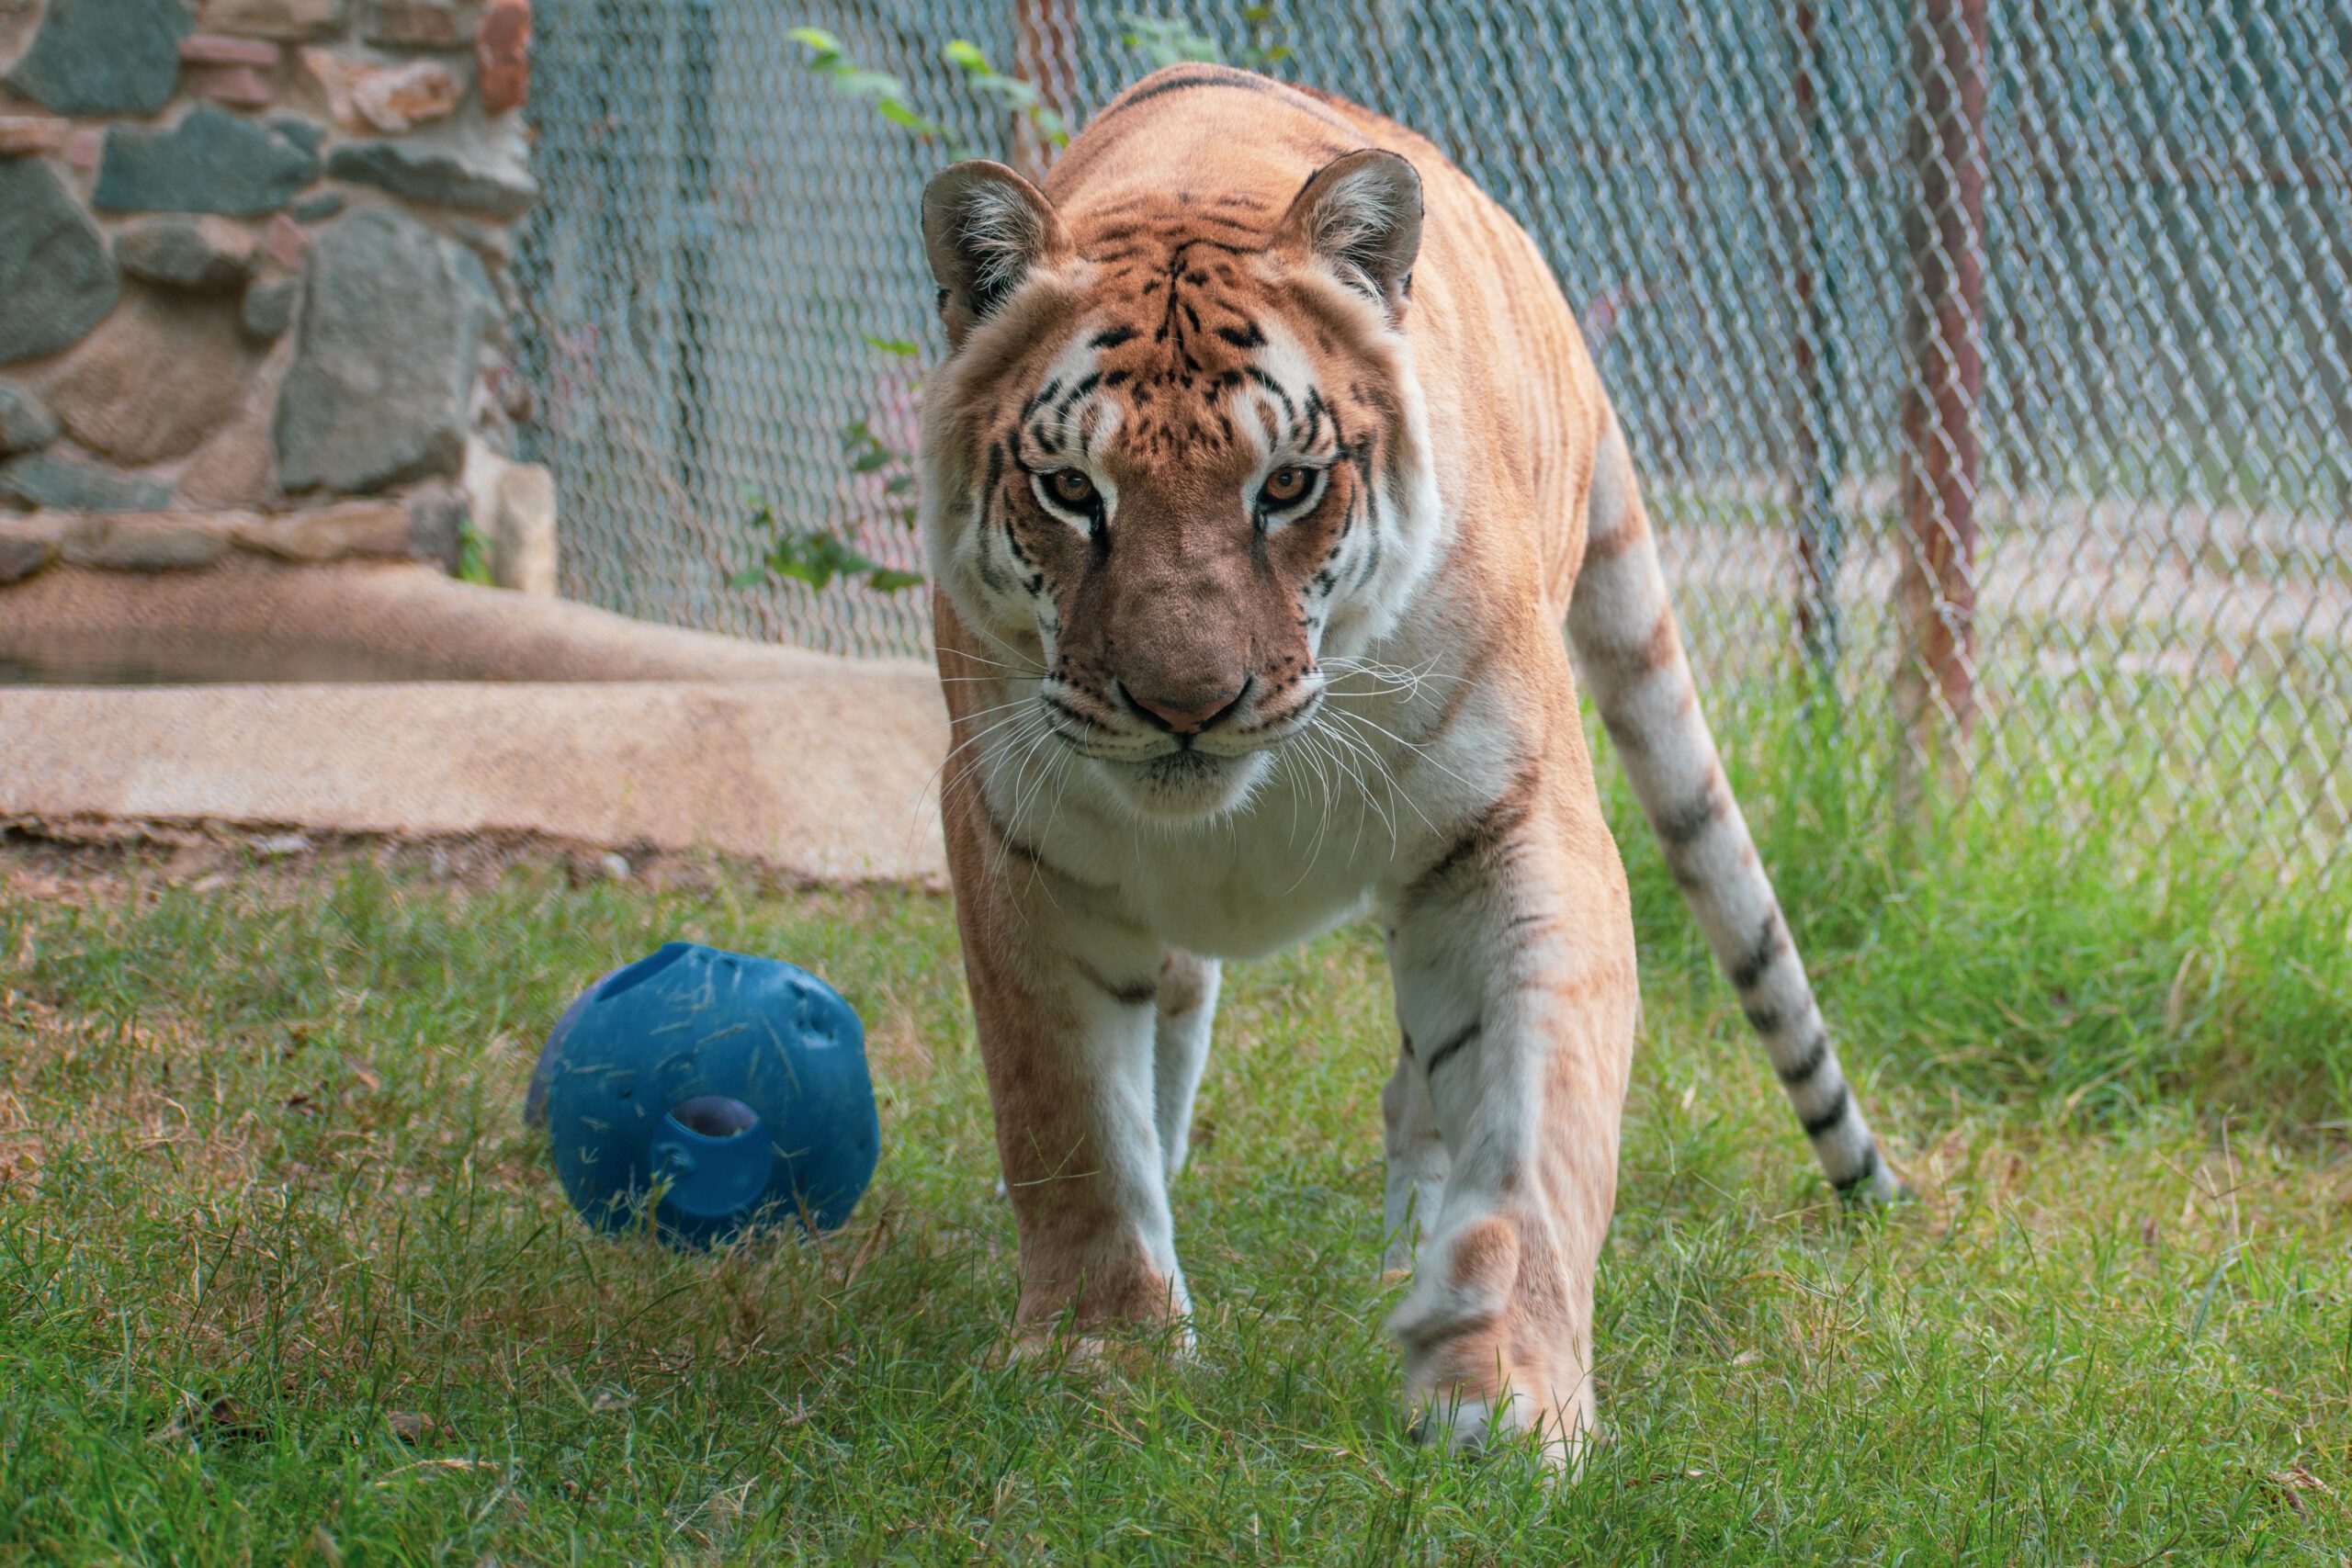 tabatha playing with a blue ball